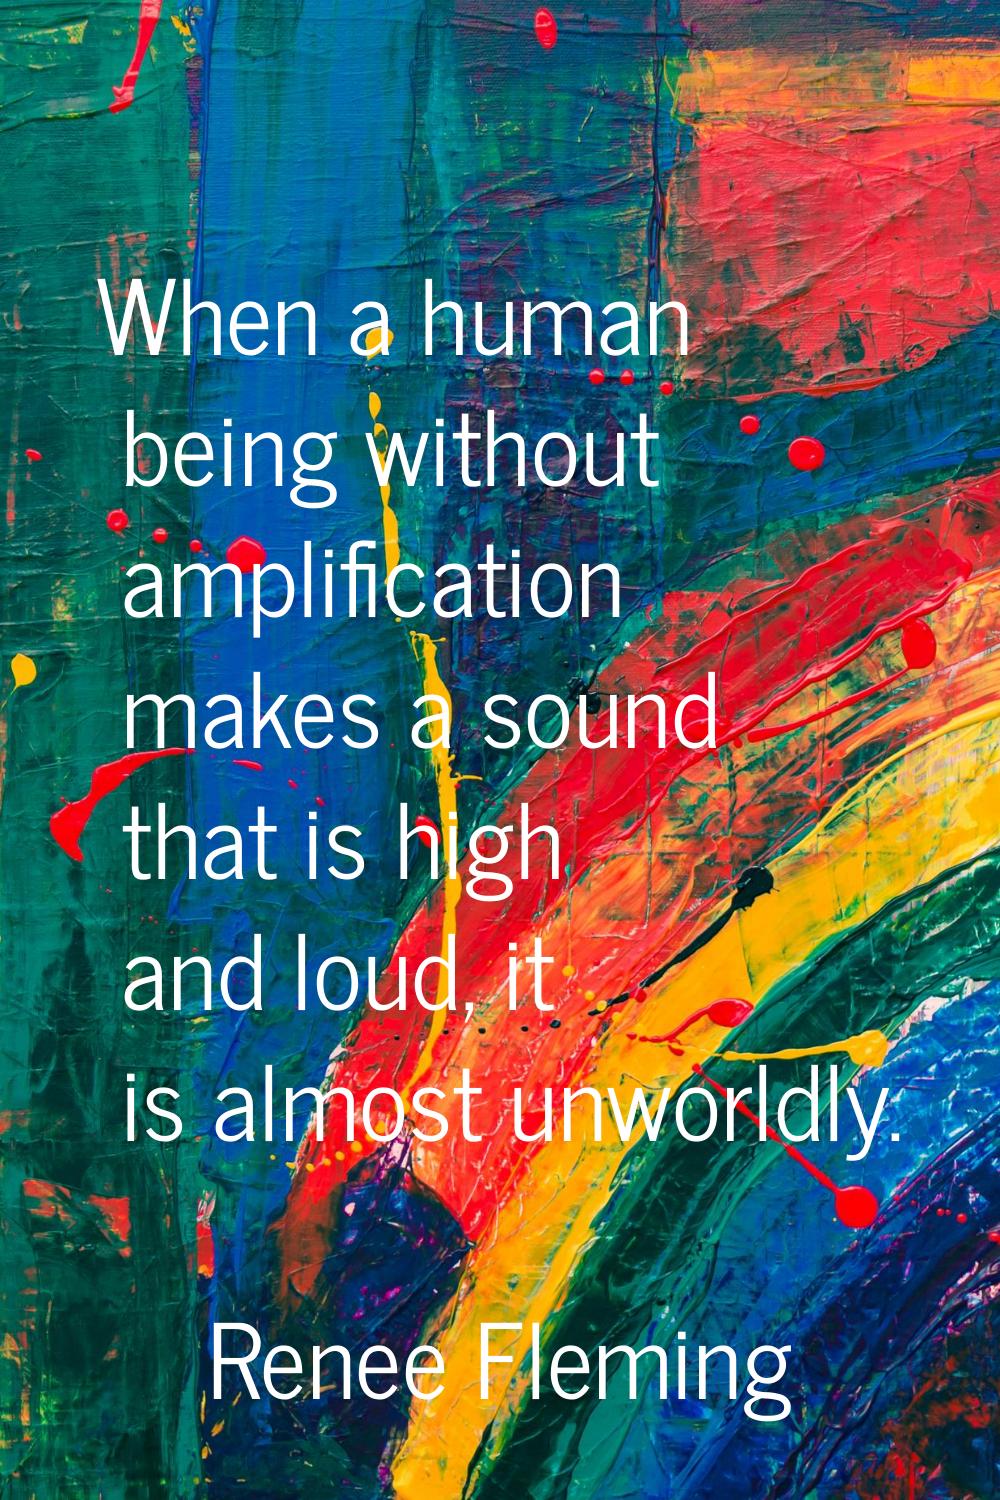 When a human being without amplification makes a sound that is high and loud, it is almost unworldl